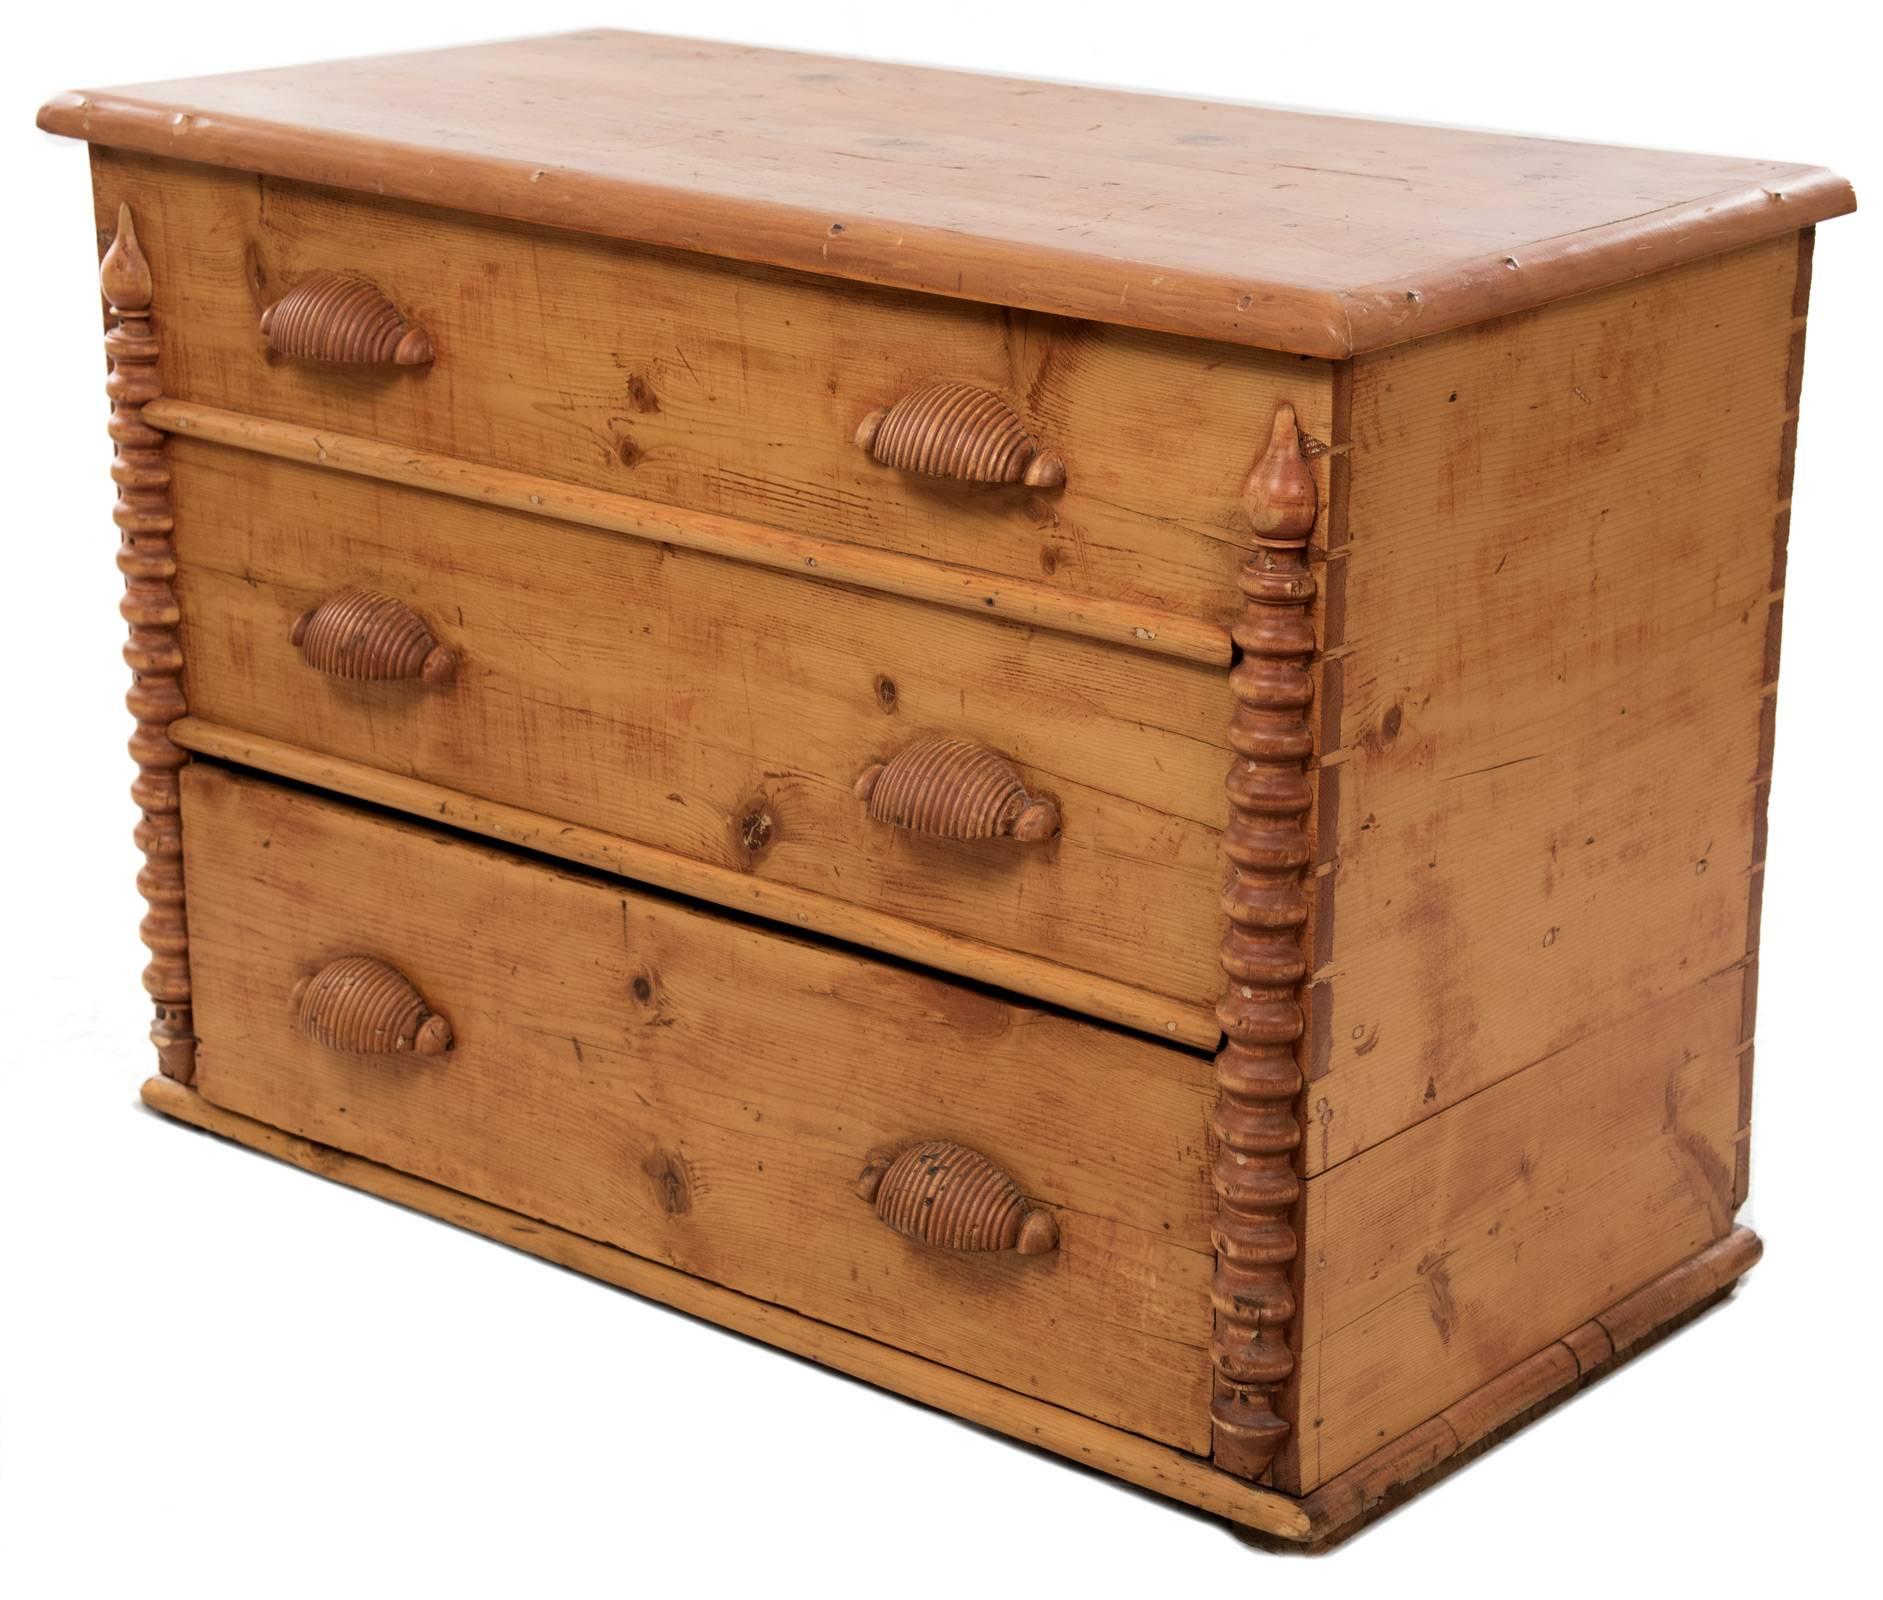 A very rare example of early Mormon Pioneer furniture, with its original pine grain visible and berry veneer, which is created from mixing tree sap with various indigenous berries to create a reddish hue. The mule chest is so called for the